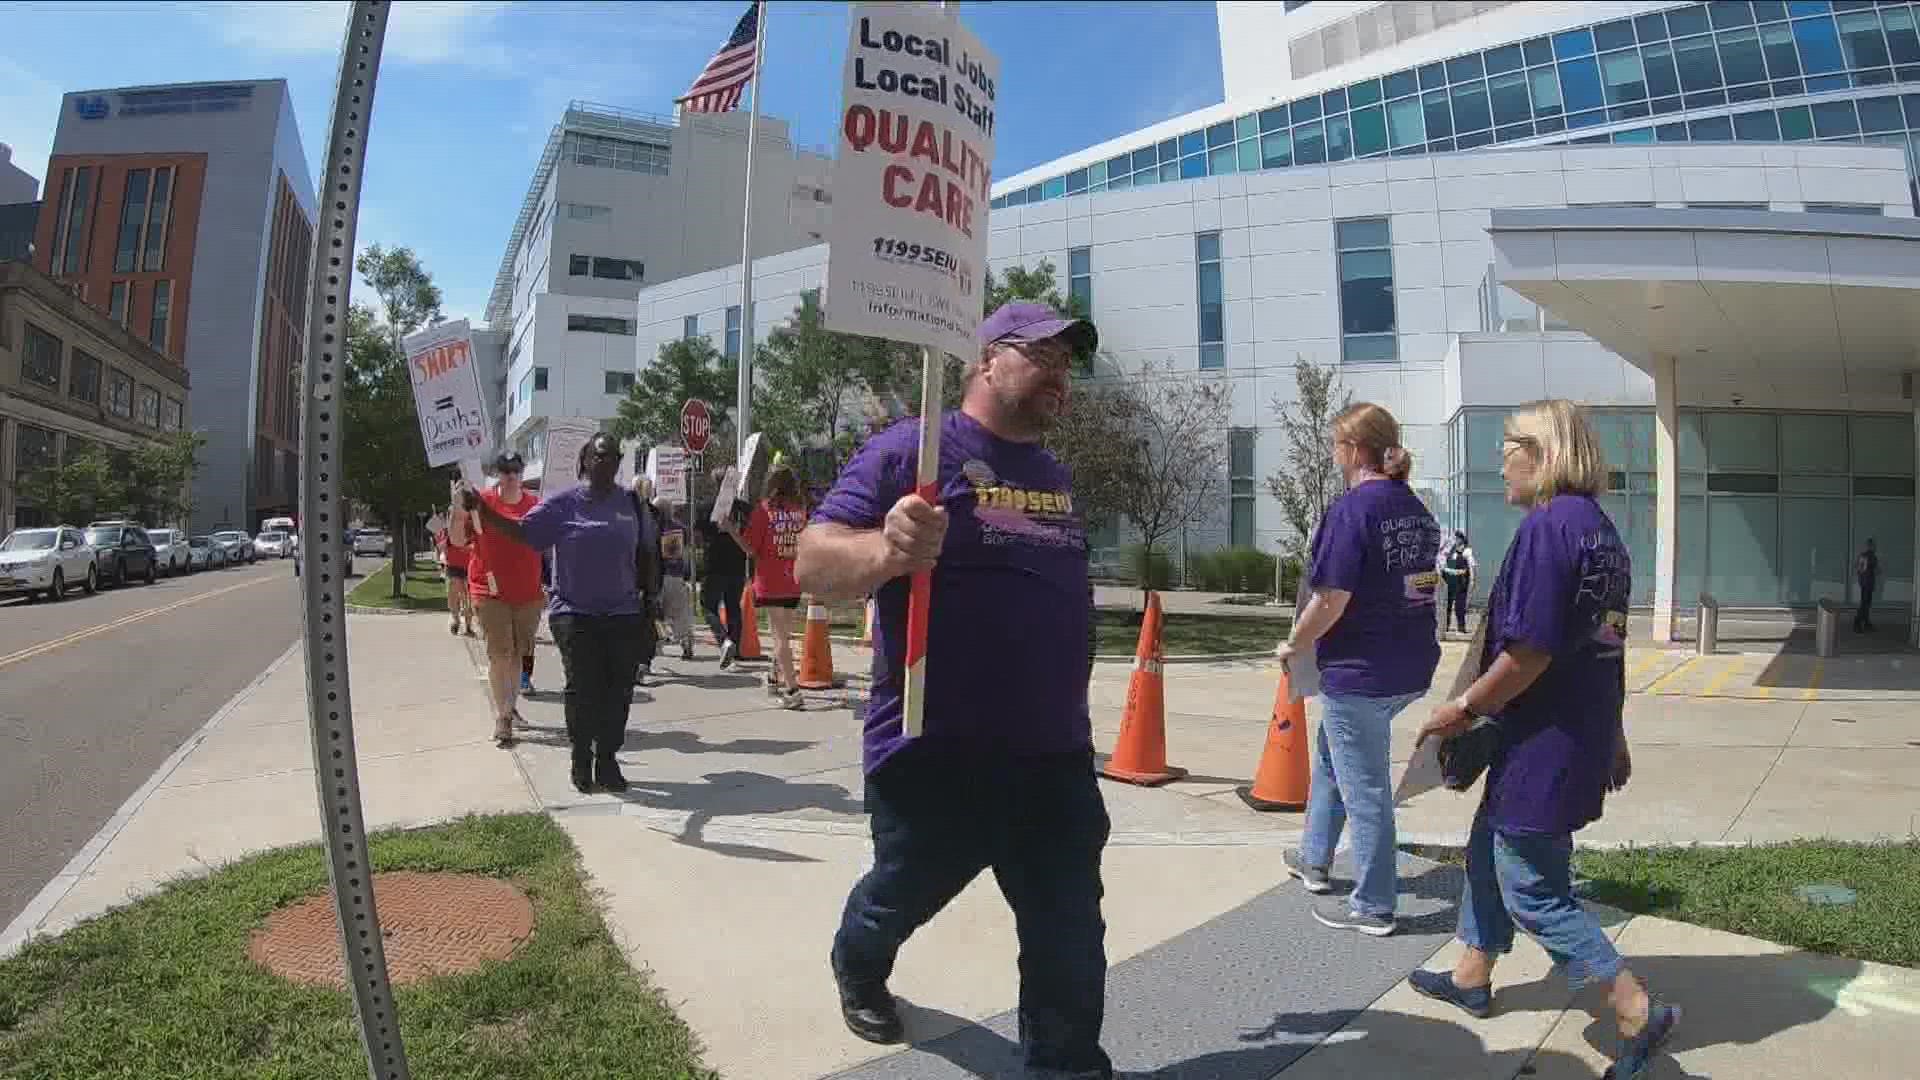 Workers say contract negotiations are taking too long.